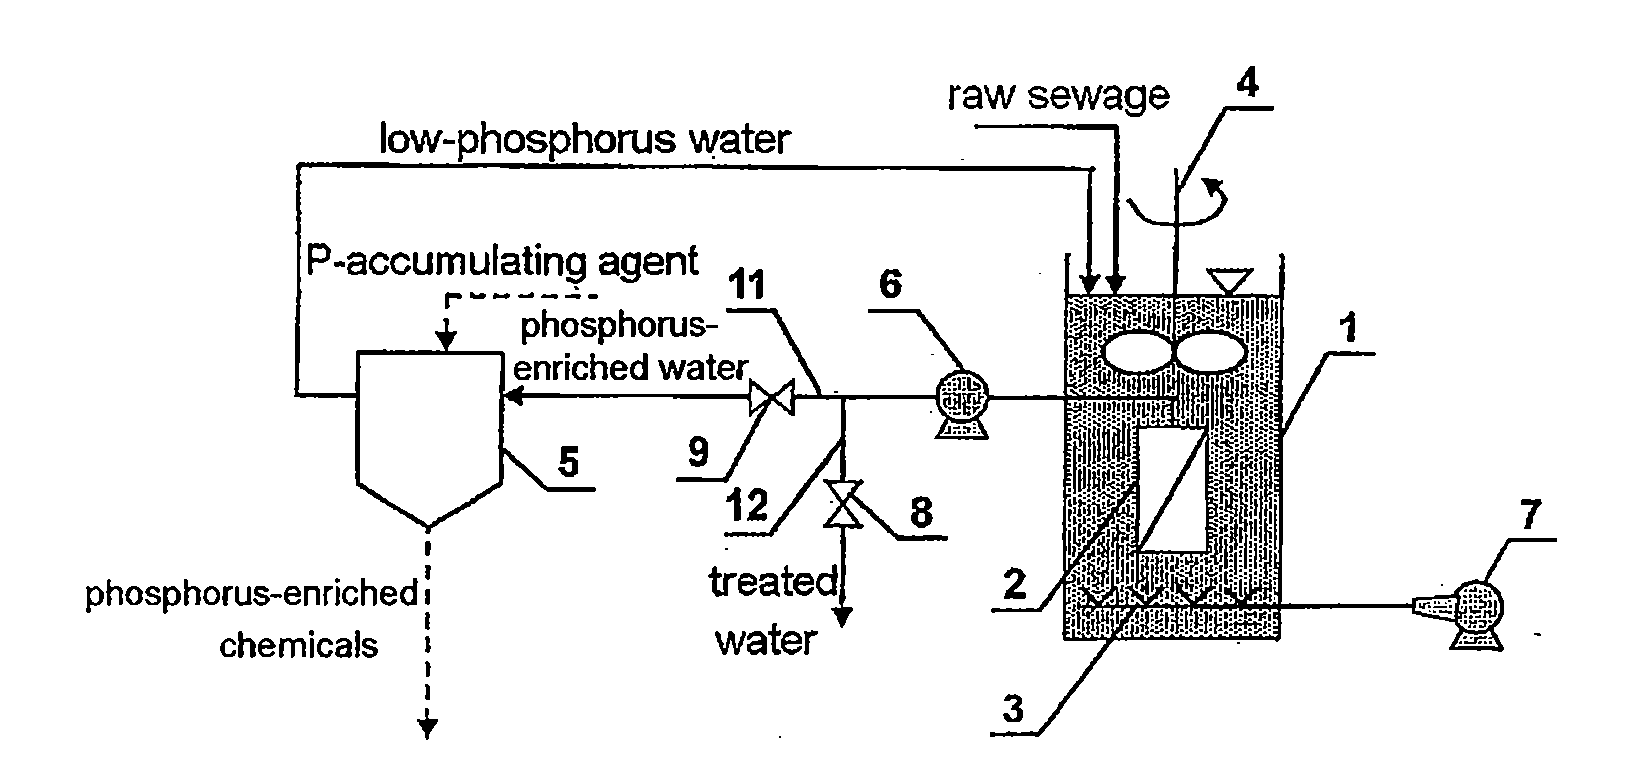 Sewage Treatment Process and System